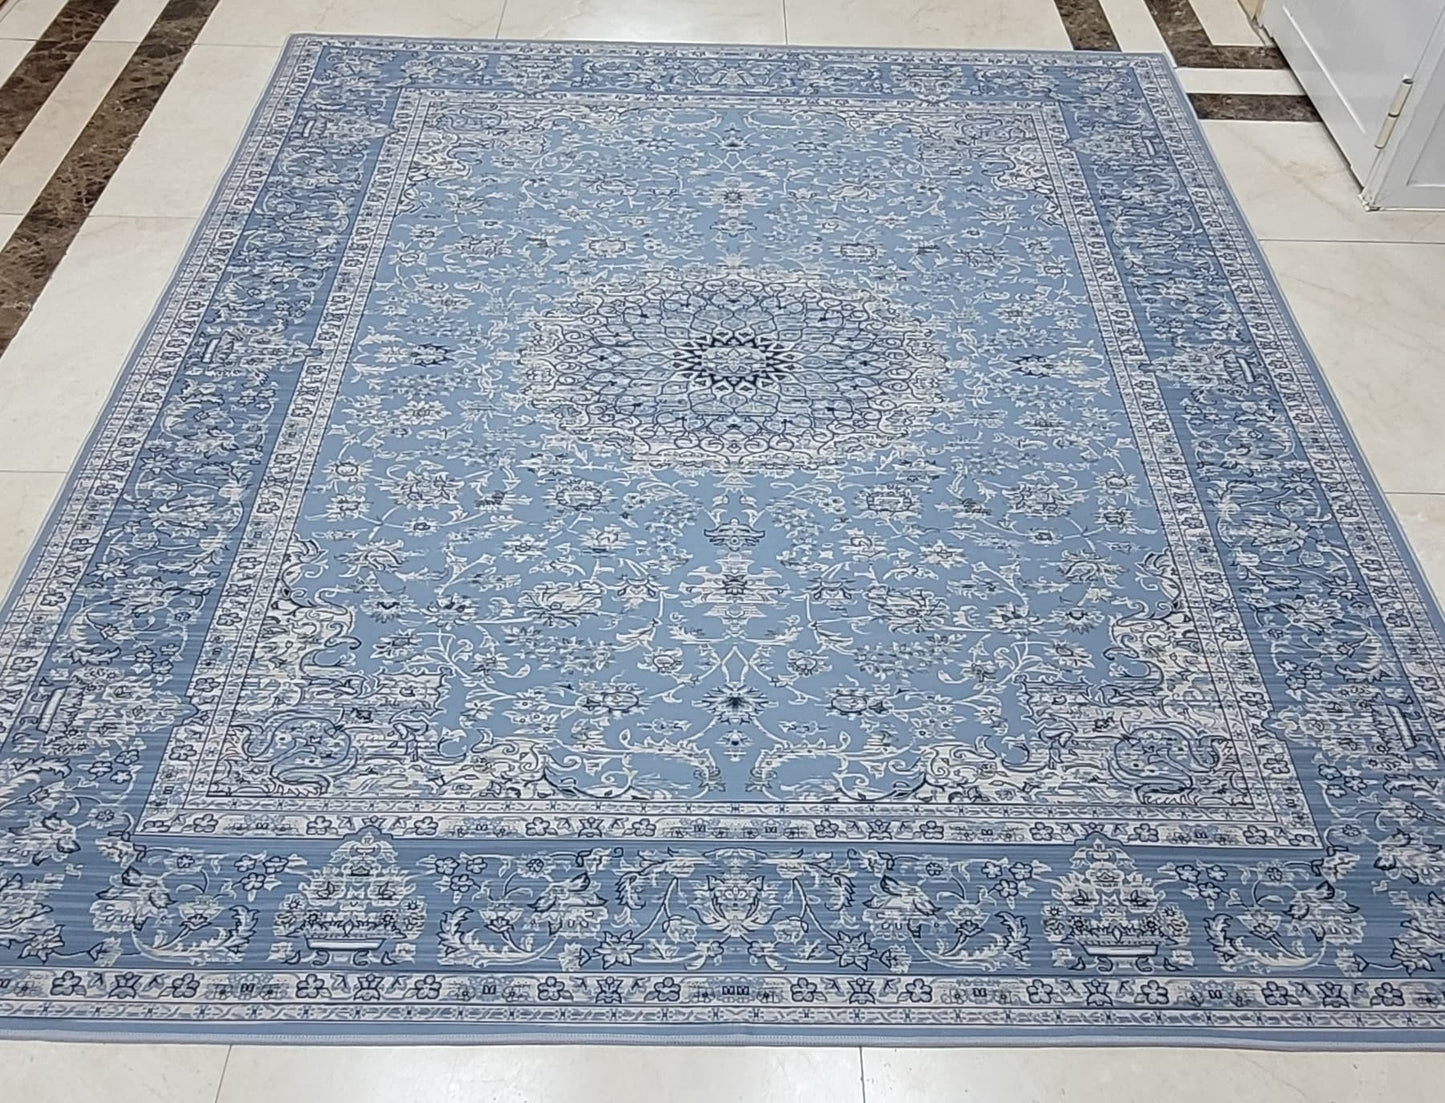 Brand New Crystal  carpet - Rectangular - Anti slip with Quality specifications 180 x 200cm►5.90 x 6.56ft